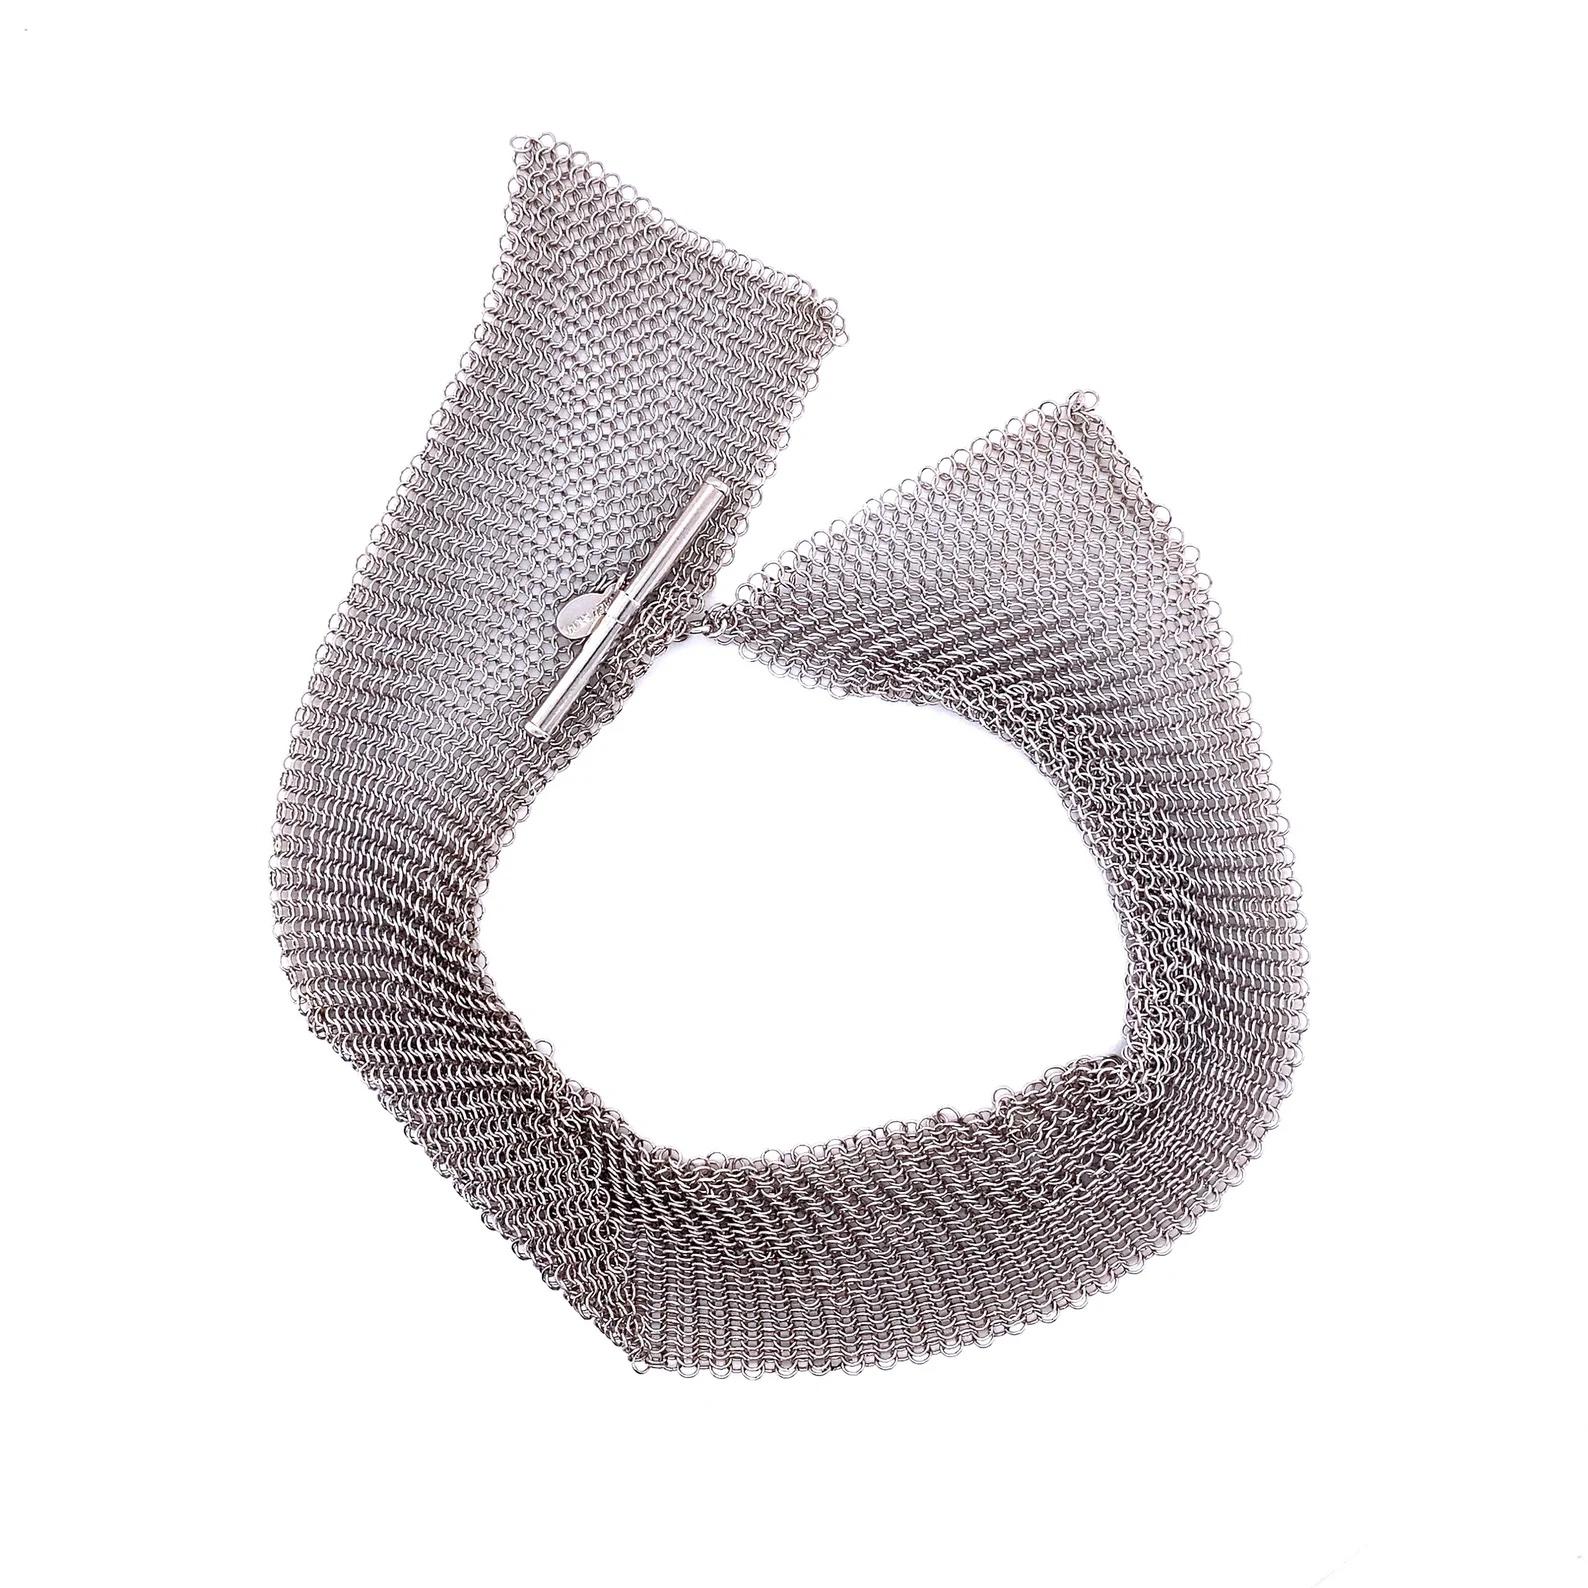 Lull, Sculptural Chainmaille Mesh Sterling Silver Bracelet by Ashley Childs - fine, delicate sculpted mesh, hidden opening for toggle clasp, rhodium vermeil sterling silver; measures approximately 1 inches wide, 7 inches in length
Fine Mesh